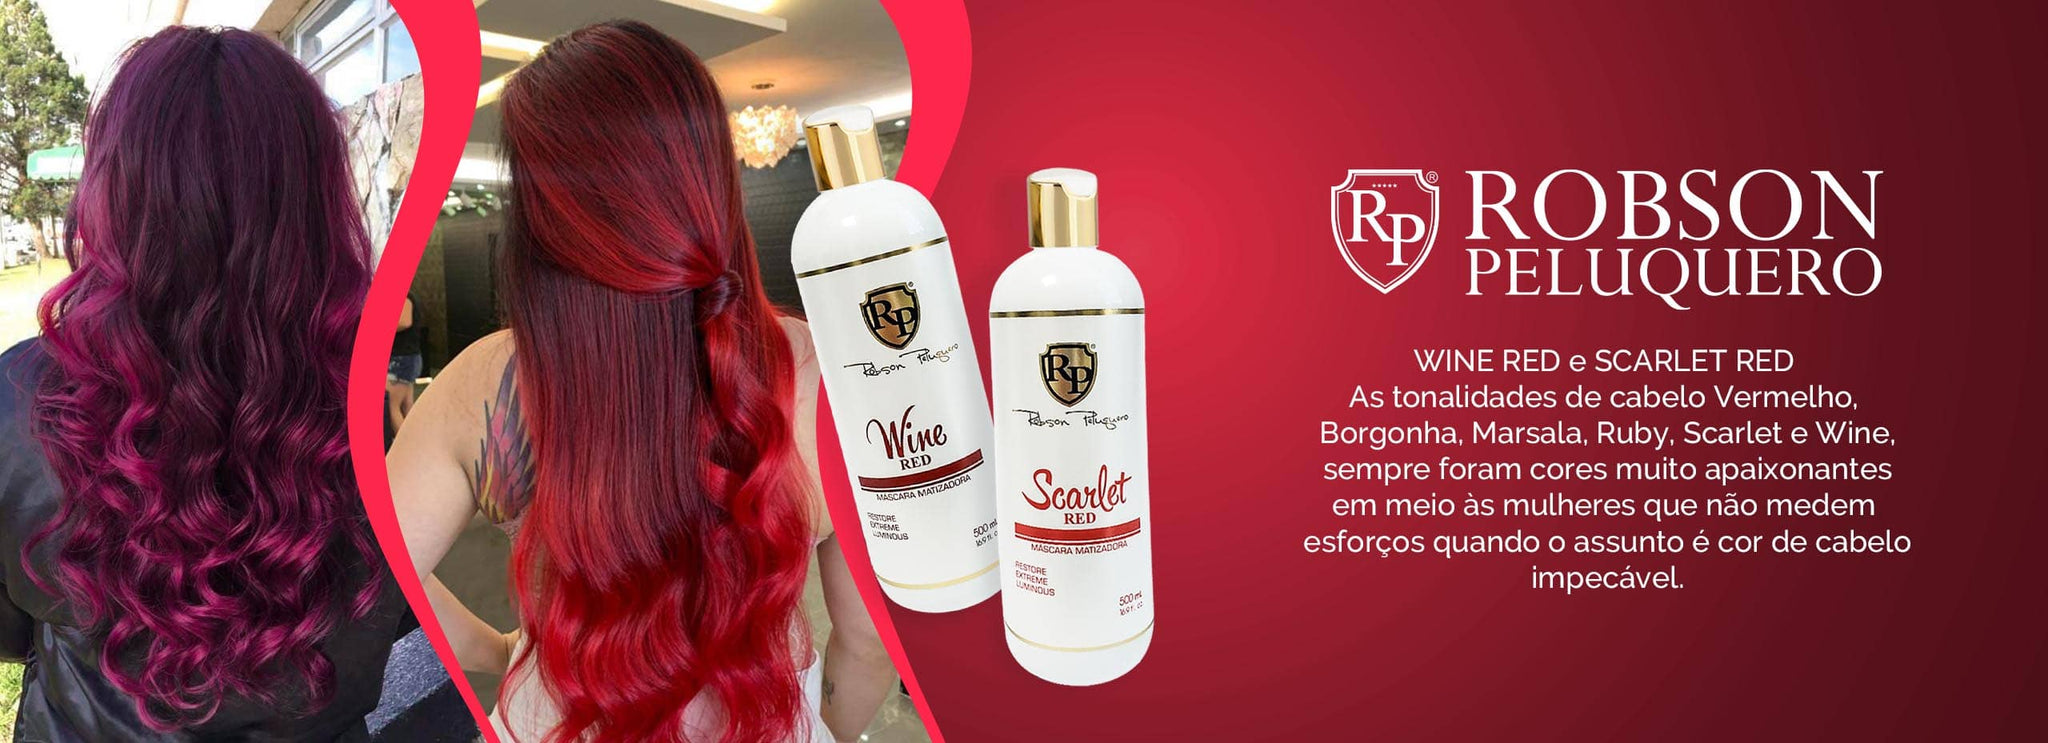 ROBSON PELUQUERO KIT CCRP PRO + SCARLET RED